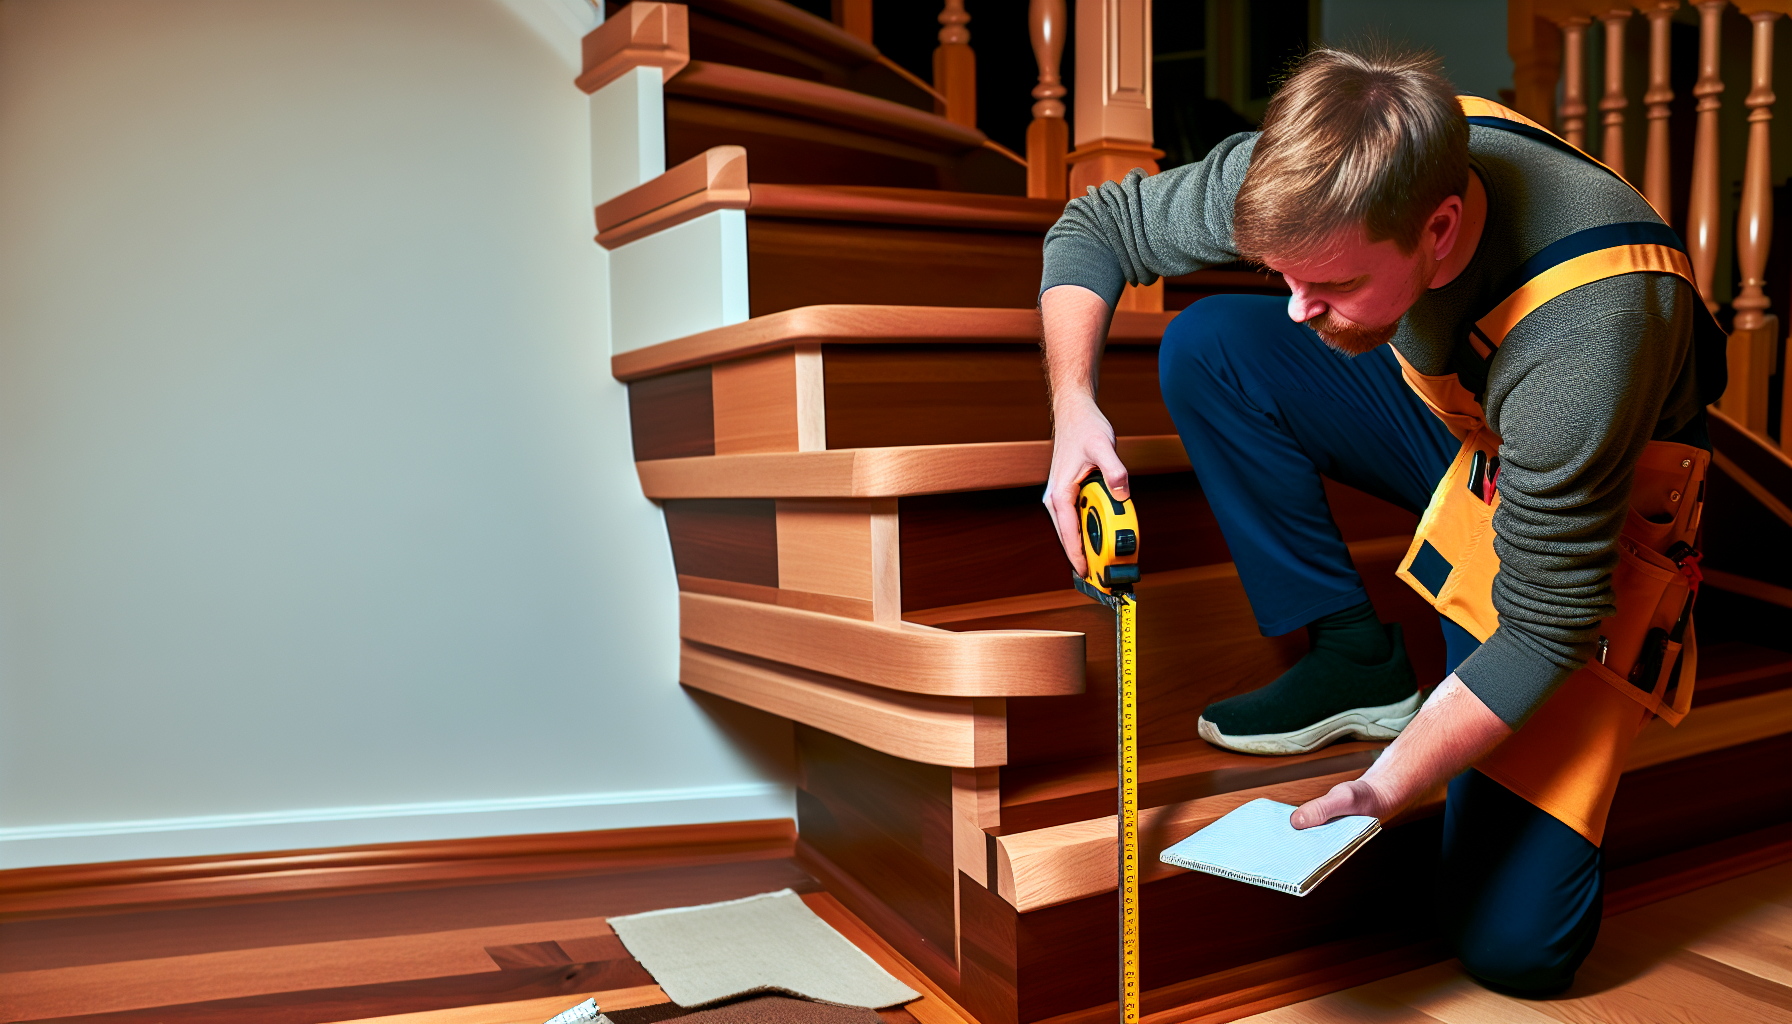 Measuring stairs for the perfect fit of a stair runner